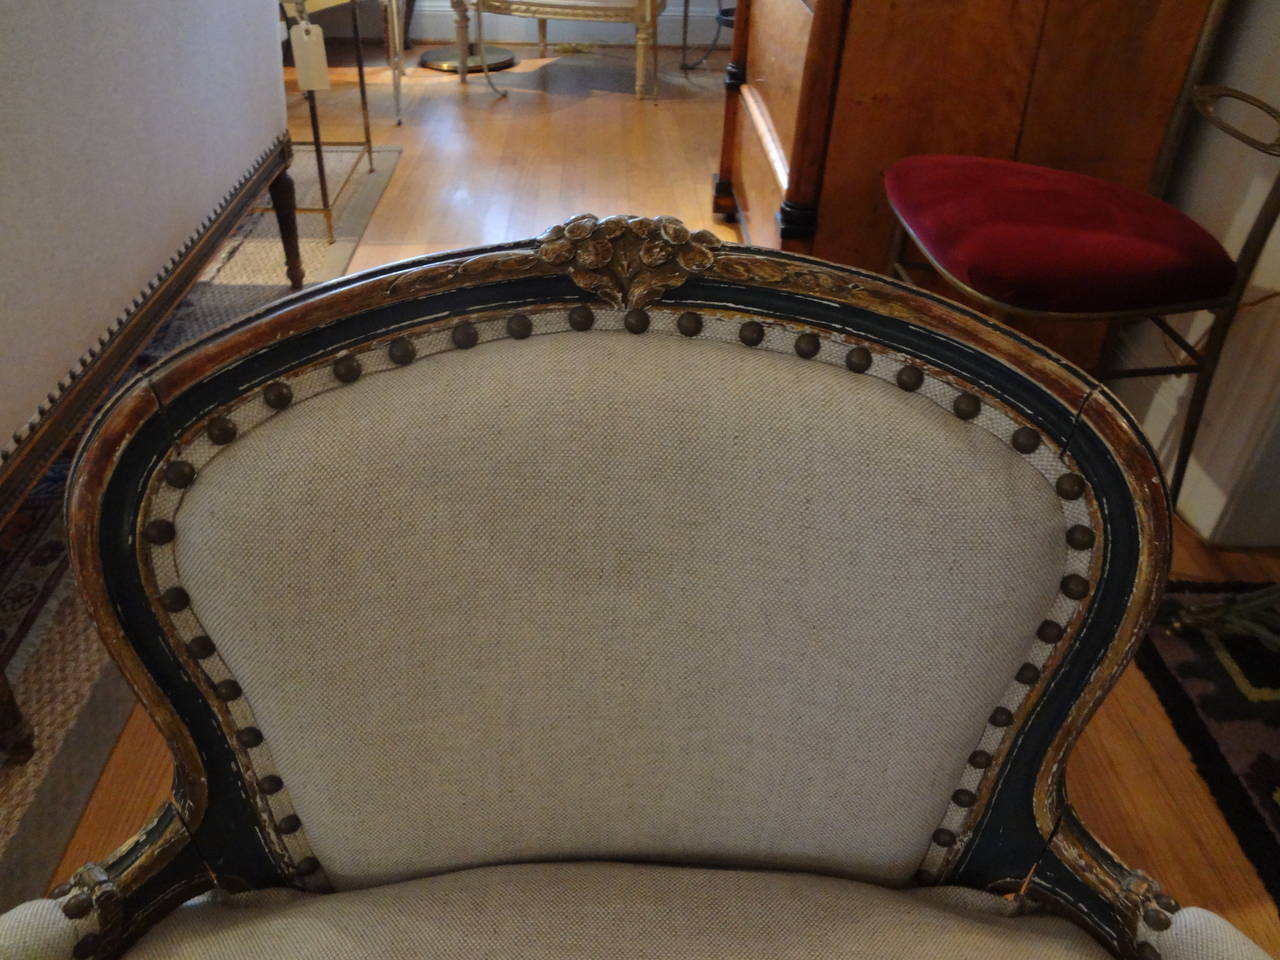 Lovely French Louis XV style painted and gilt petite bergère or children's chair newly upholstered in oatmeal linen with spaced nailhead trim.

Please click KIRBY ANTIQUES logo below to view additional pieces from our vast inventory.